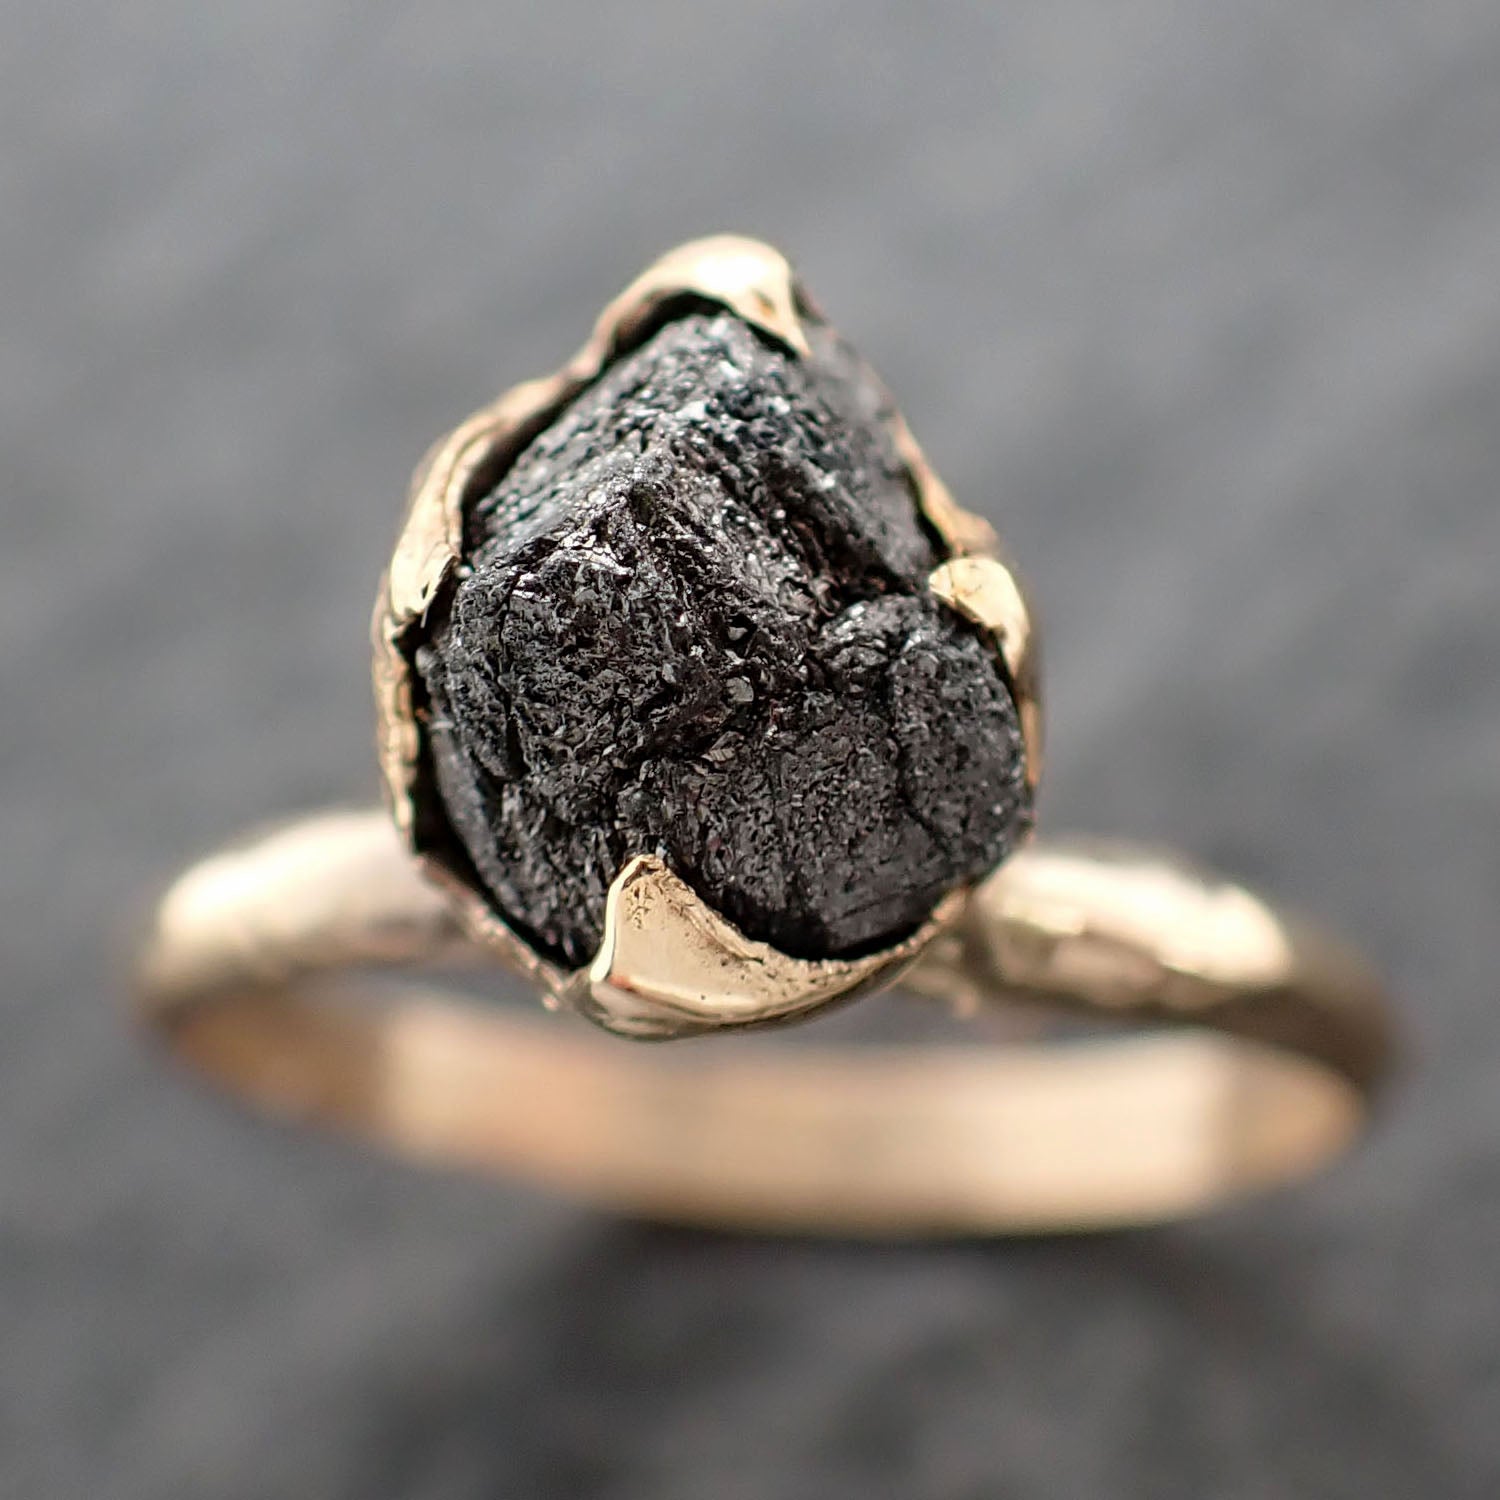 Raw black Diamond Solitaire Engagement Ring Rough Uncut 14k yellow gold Conflict Free Black Diamond Wedding Promise 2558